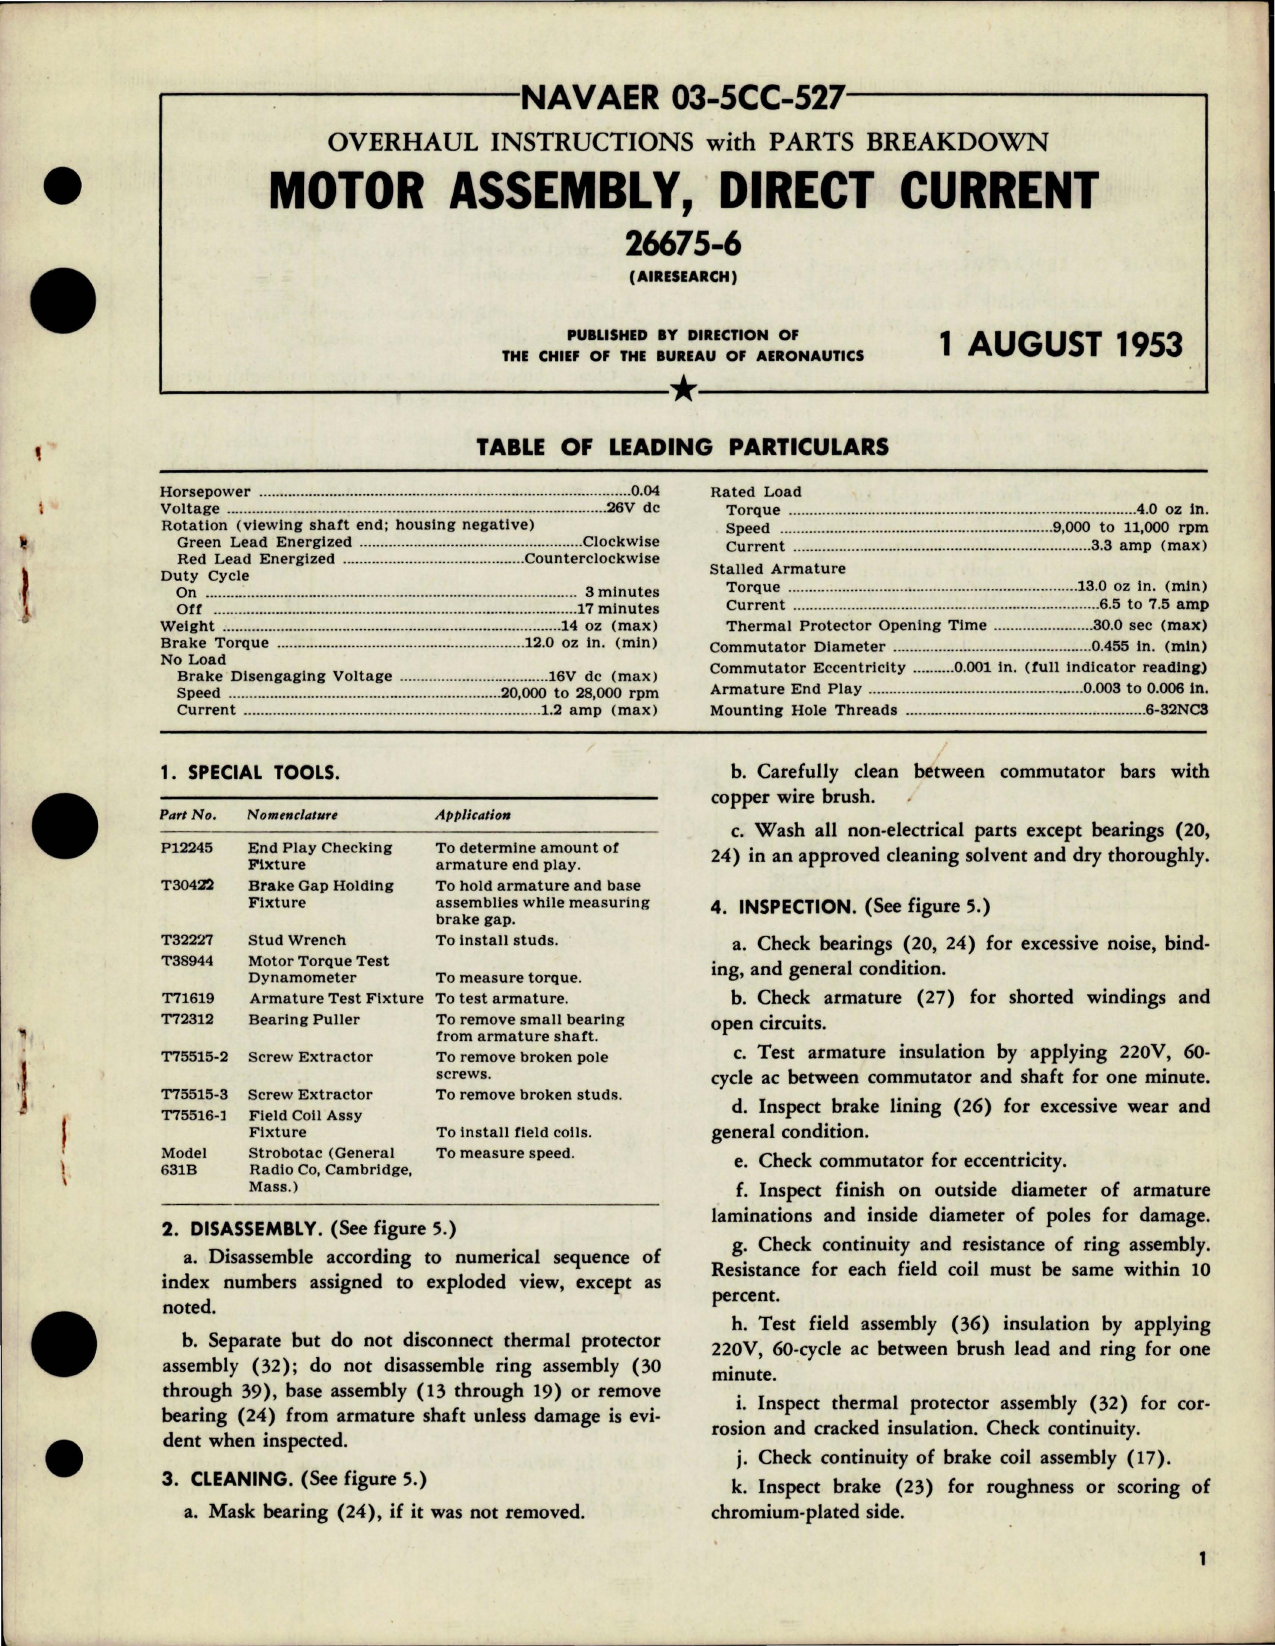 Sample page 1 from AirCorps Library document: Overhaul Instructions with Parts for Direct Current Motor Assembly - 26675-6 